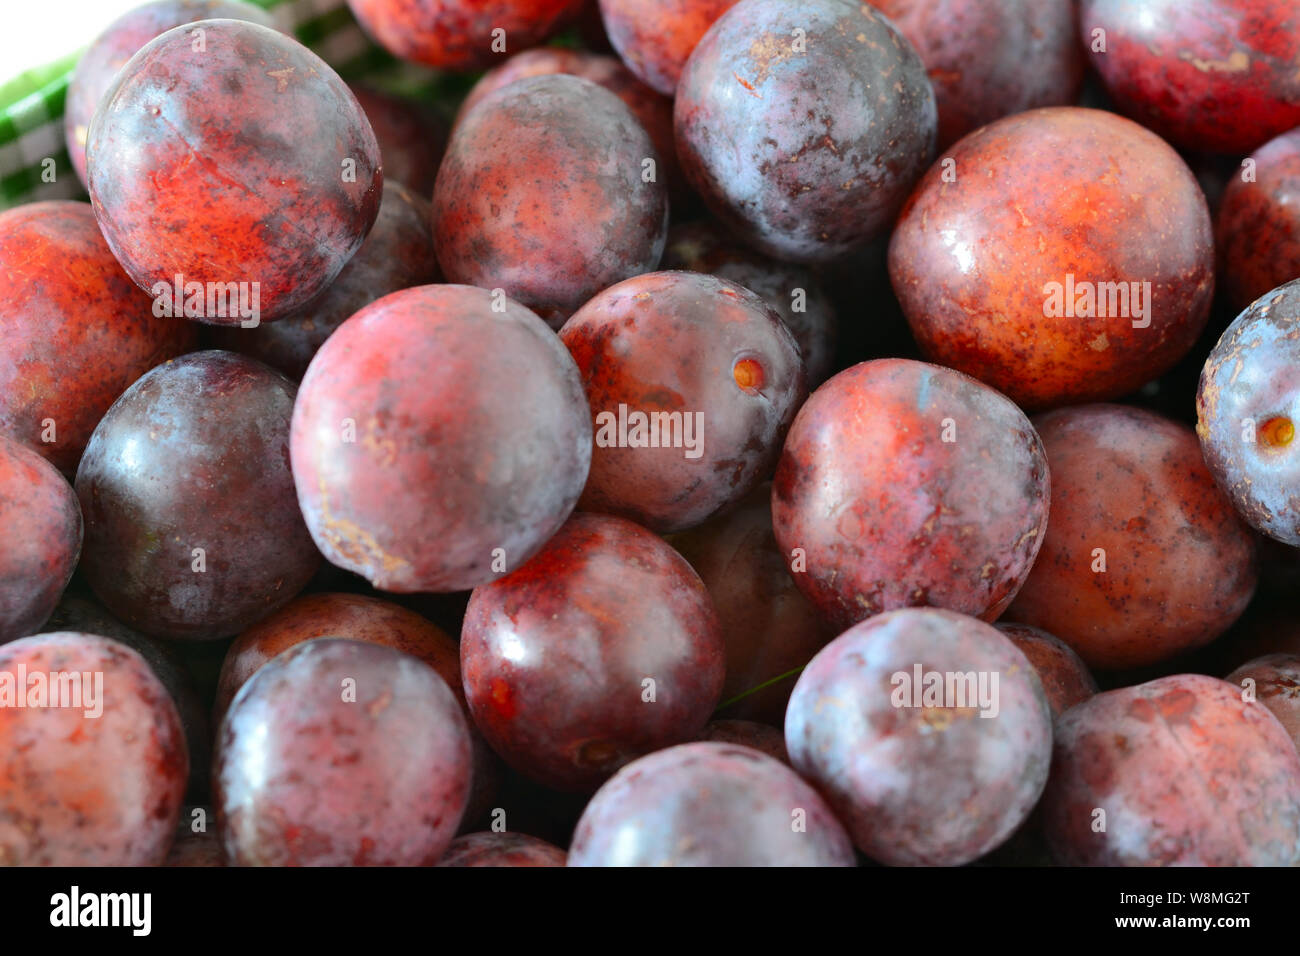 Natural red mirabelle plums from the garden Stock Photo - Alamy